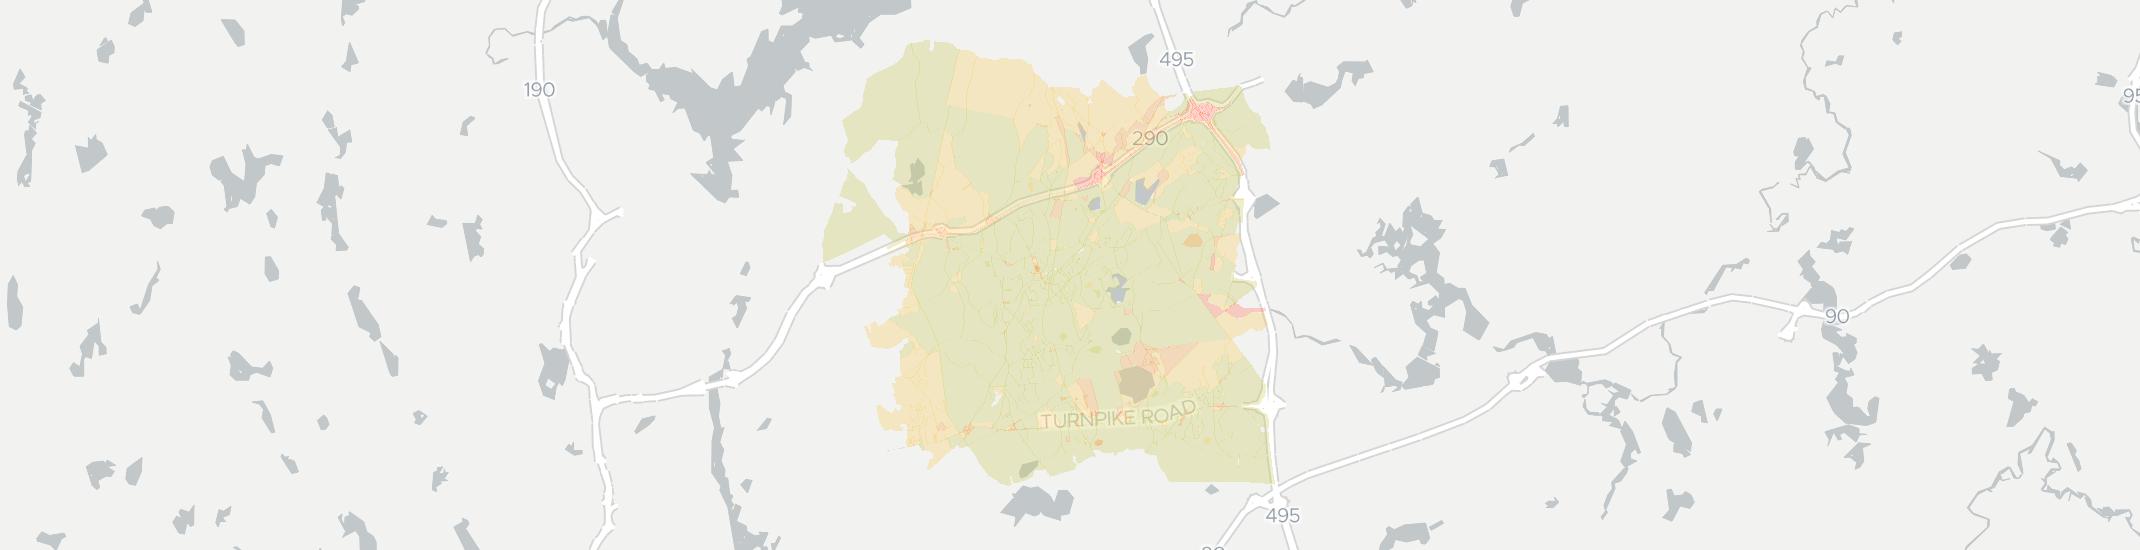 Northborough Internet Competition Map. Click for interactive map.